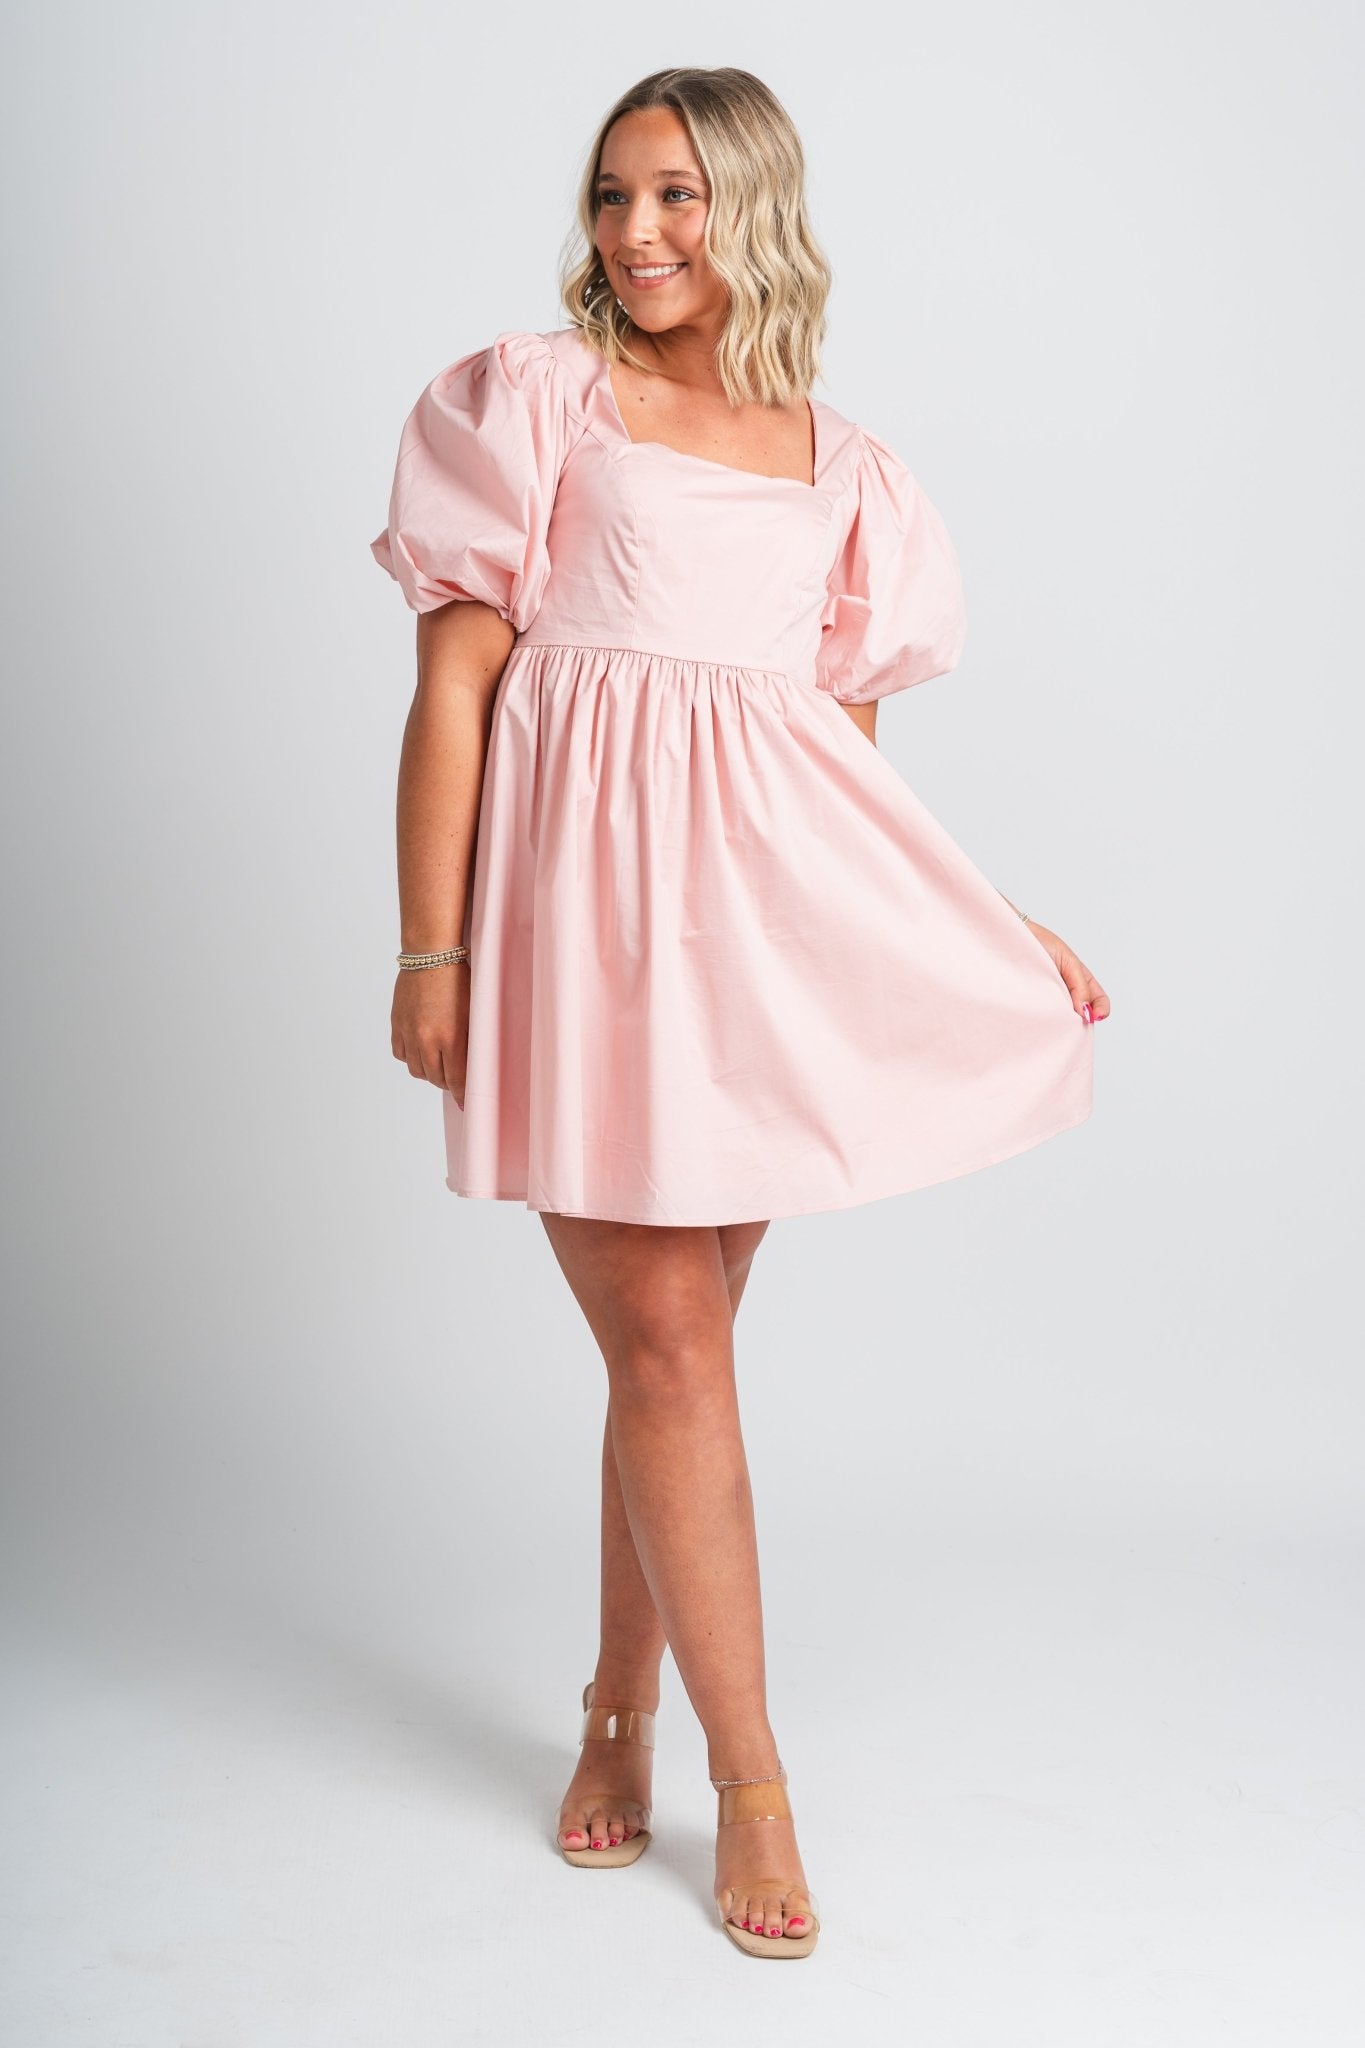 Babydoll mini dress pink - Cute Dress - Trendy Easter Clothing Line at Lush Fashion Lounge Boutique in Oklahoma